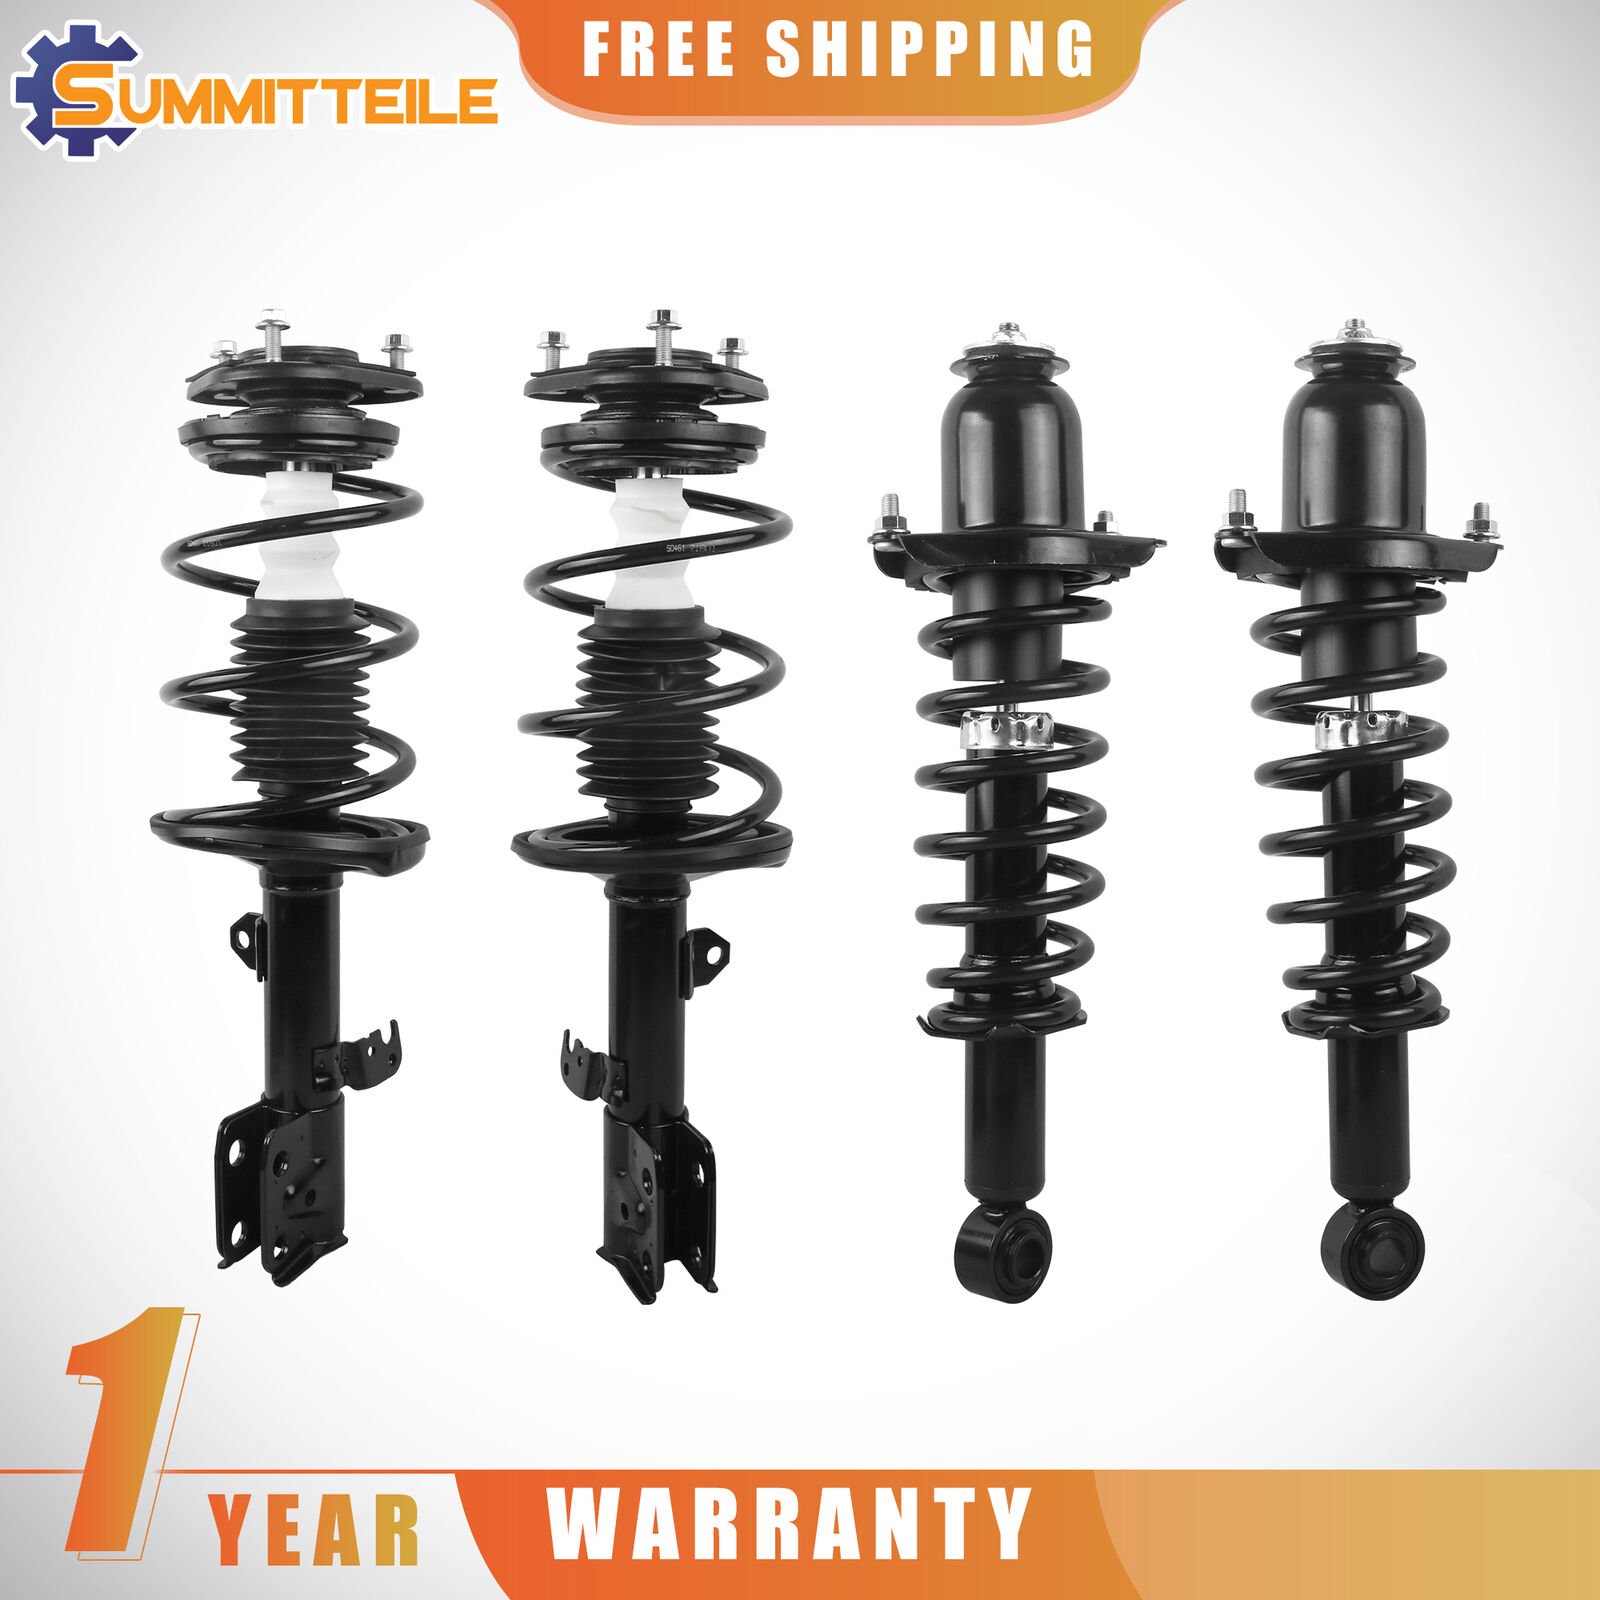 4X Front Rear LH+RH Complete Struts Shocks w/ Coils For 2011-2013 Toyota Corolla